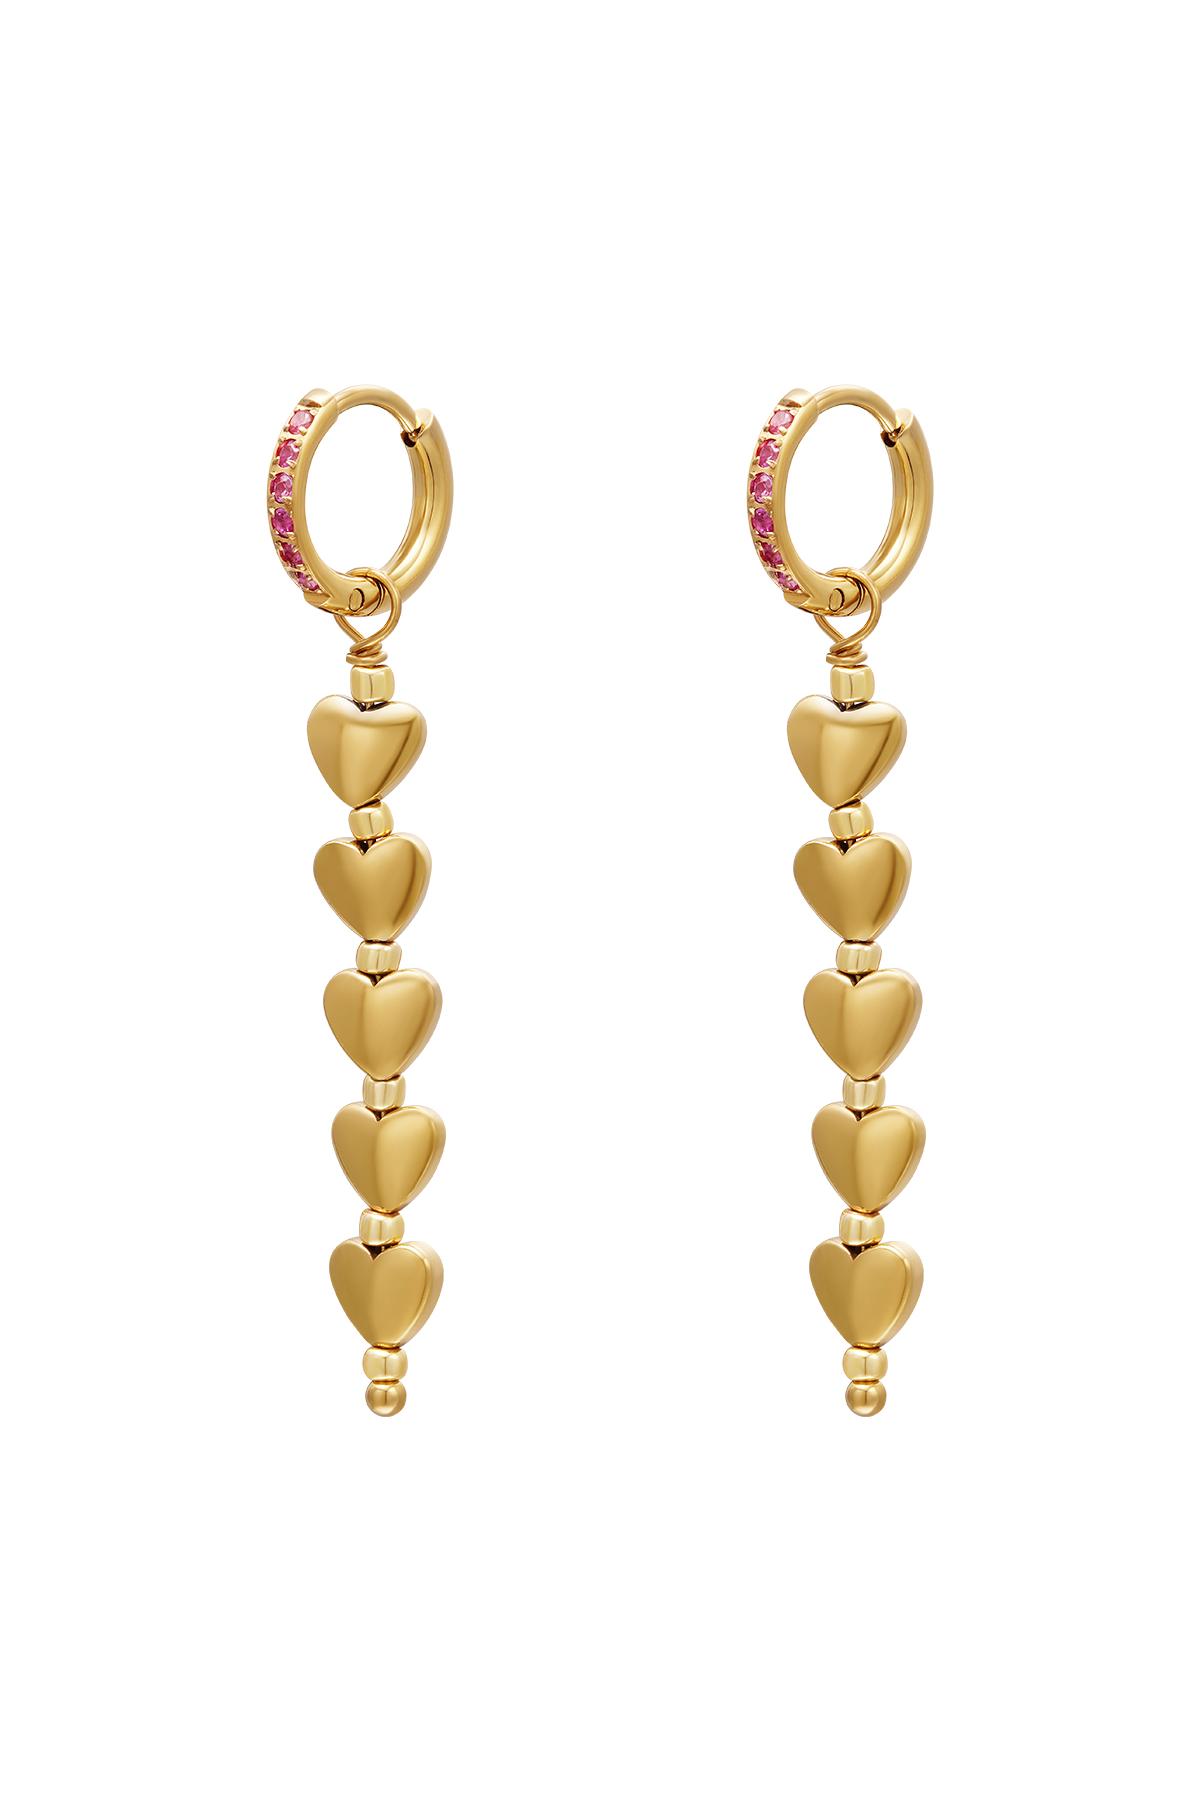 Five hearts earrings - #summergirls collection Pink &amp; Gold Hematite